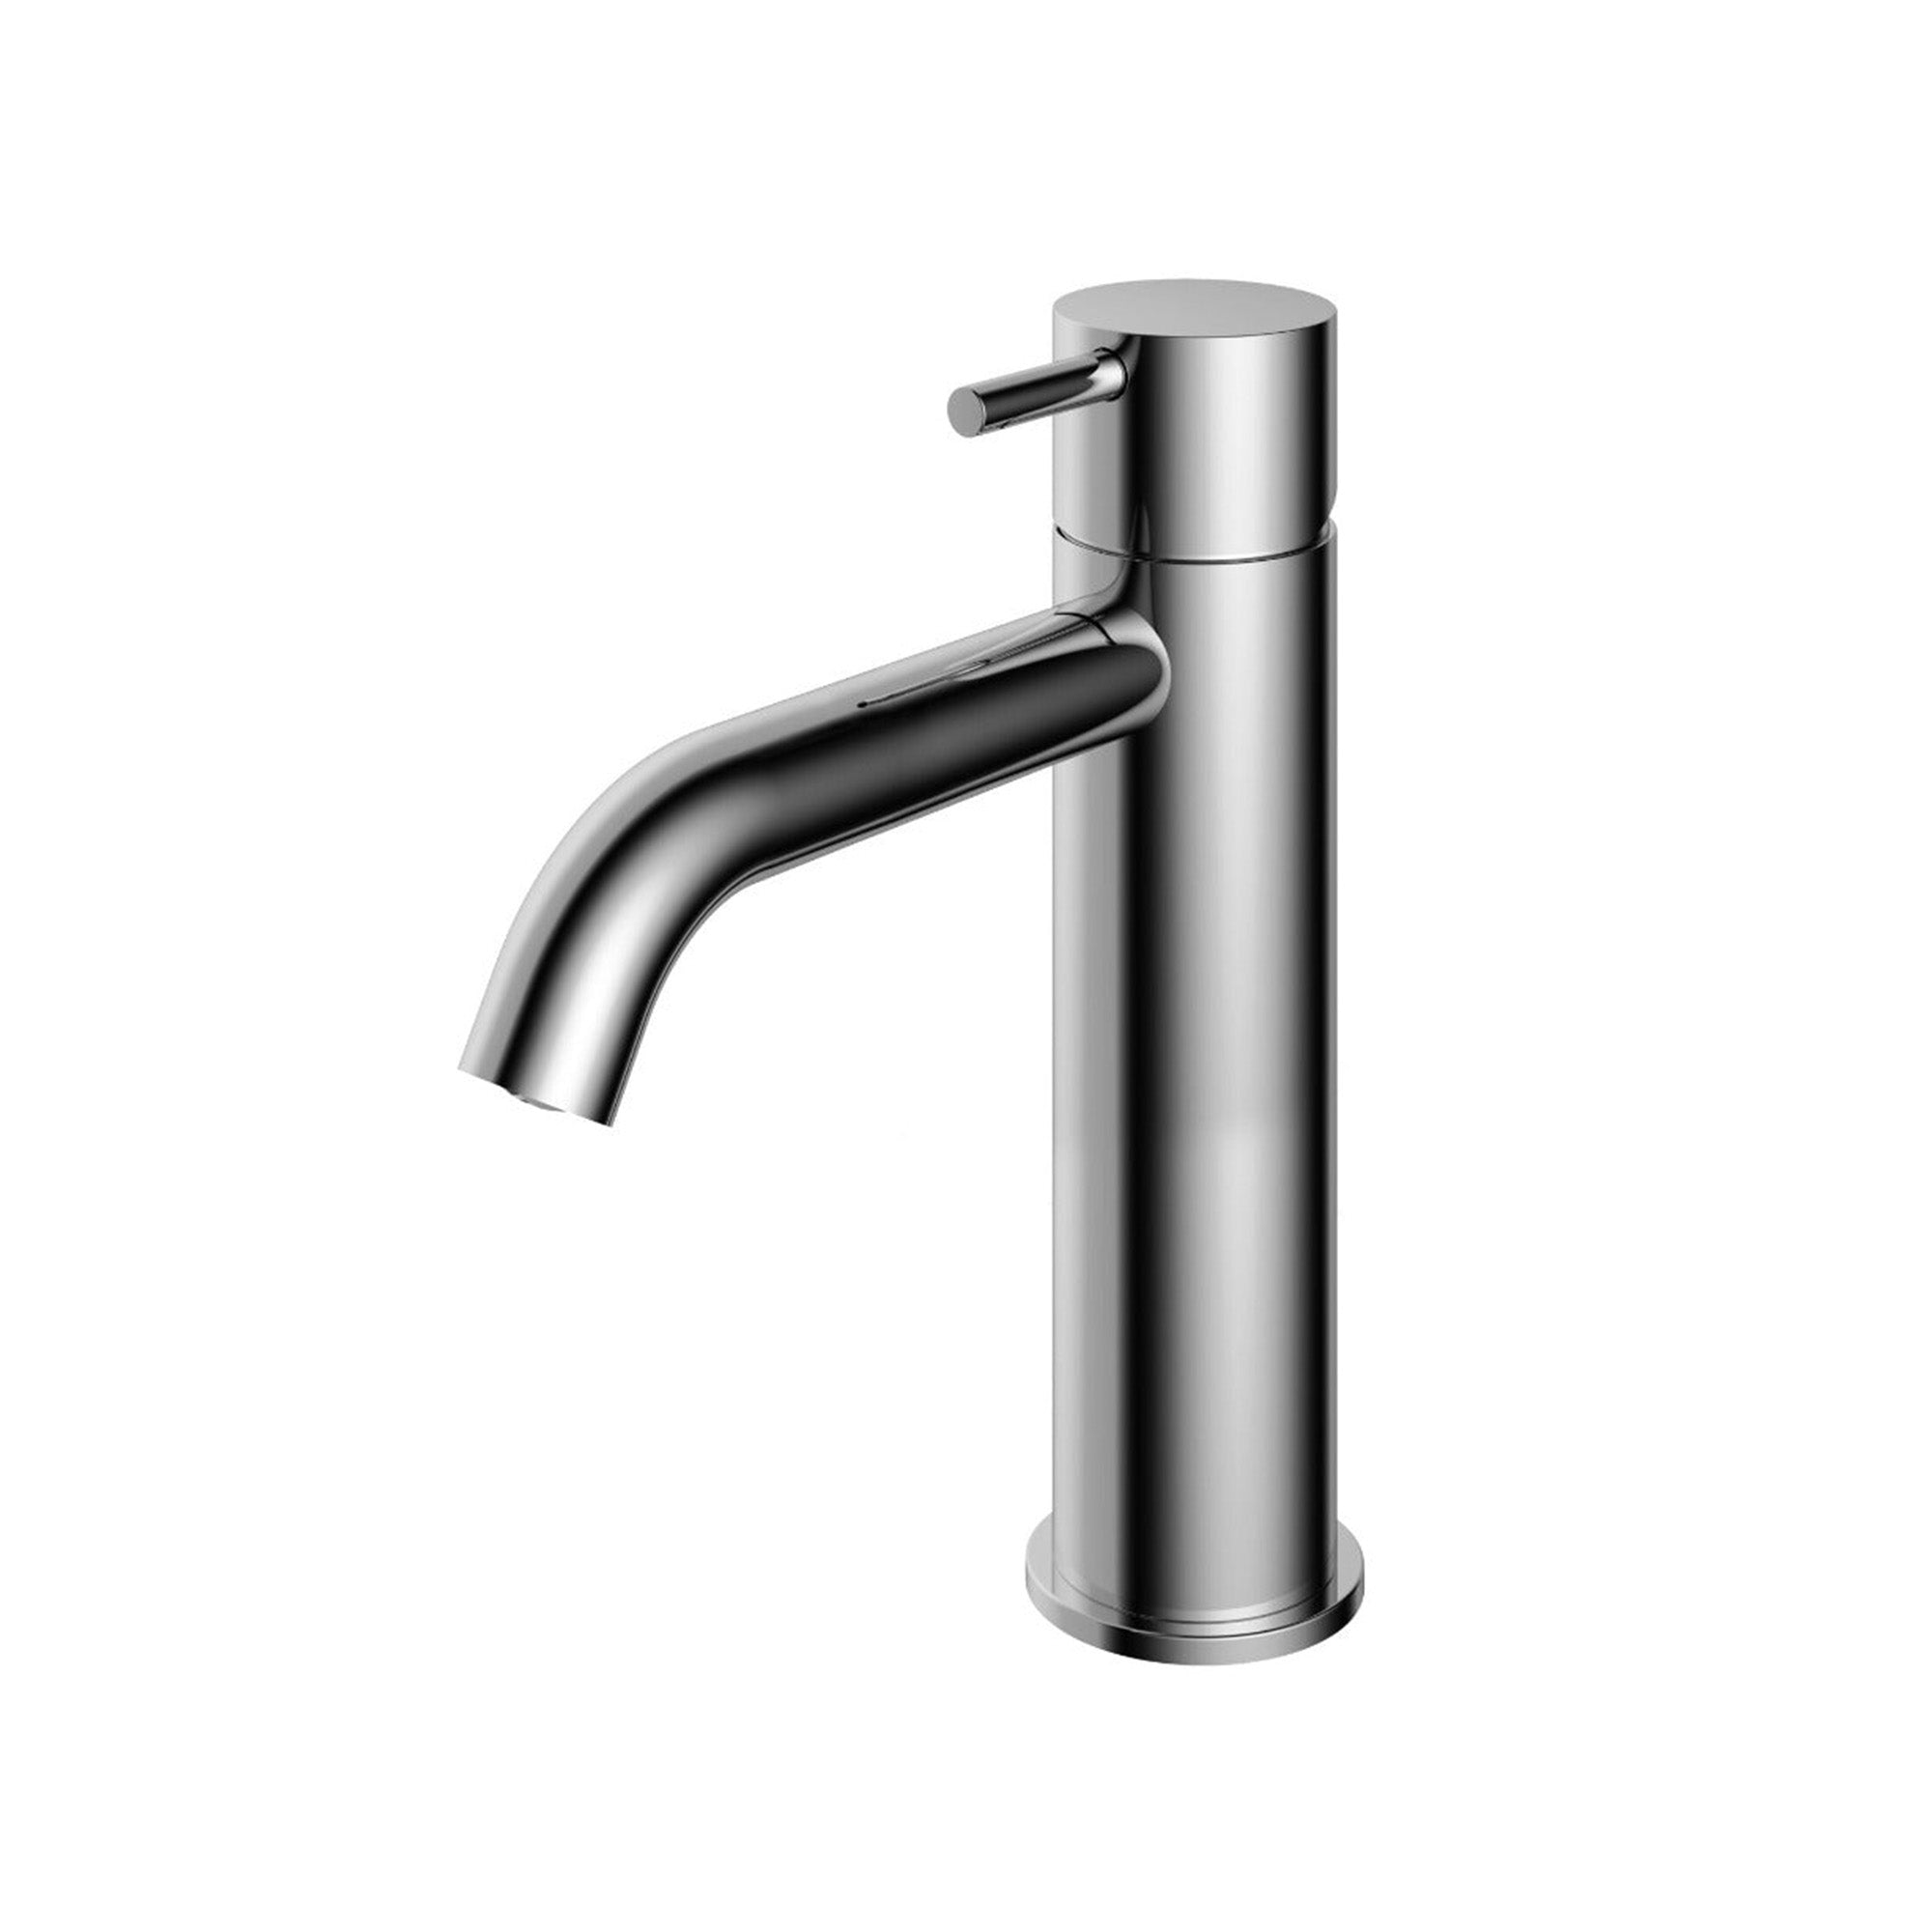 Cobber 216 Tall Basin Mixer Tap Curved Spout Monobloc